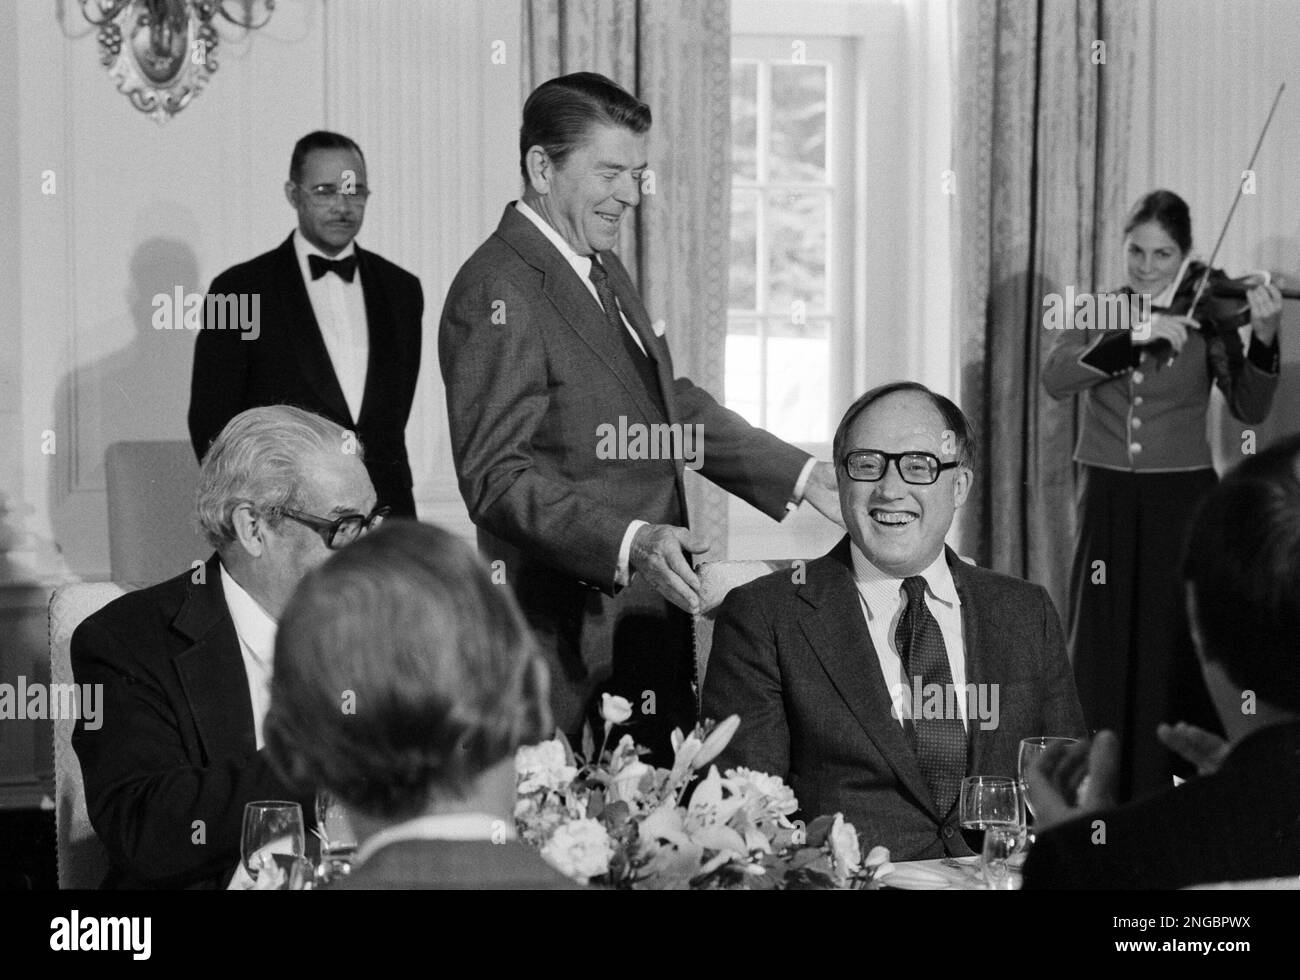 Supreme Court Justice William Rehnquist celebrates his 58th birthday as President Reagan looks on, during a luncheon in the state dining room of the White House, Oct. 2, 1982. (AP Photo/Barry Thumma) Stock Photo